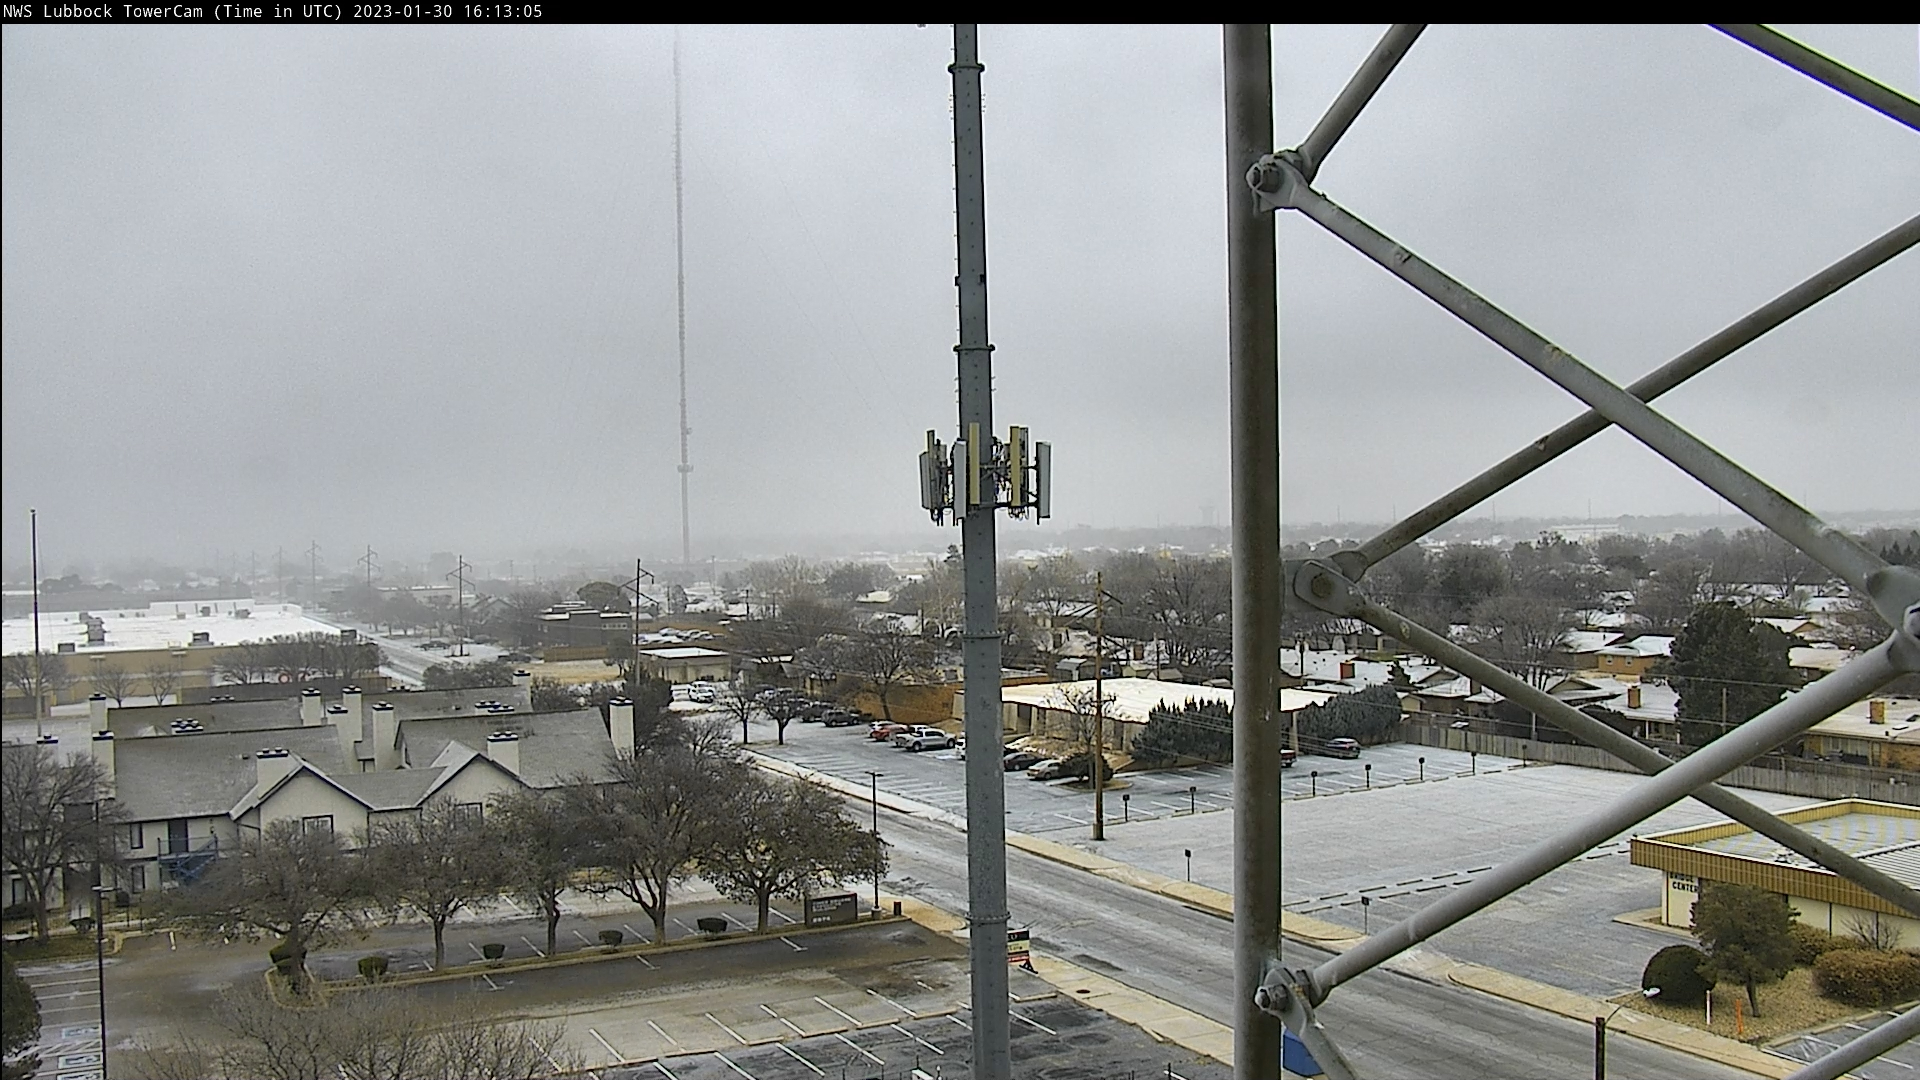 The wintry scene from NWS Lubbock Monday morning (30 January 2023).